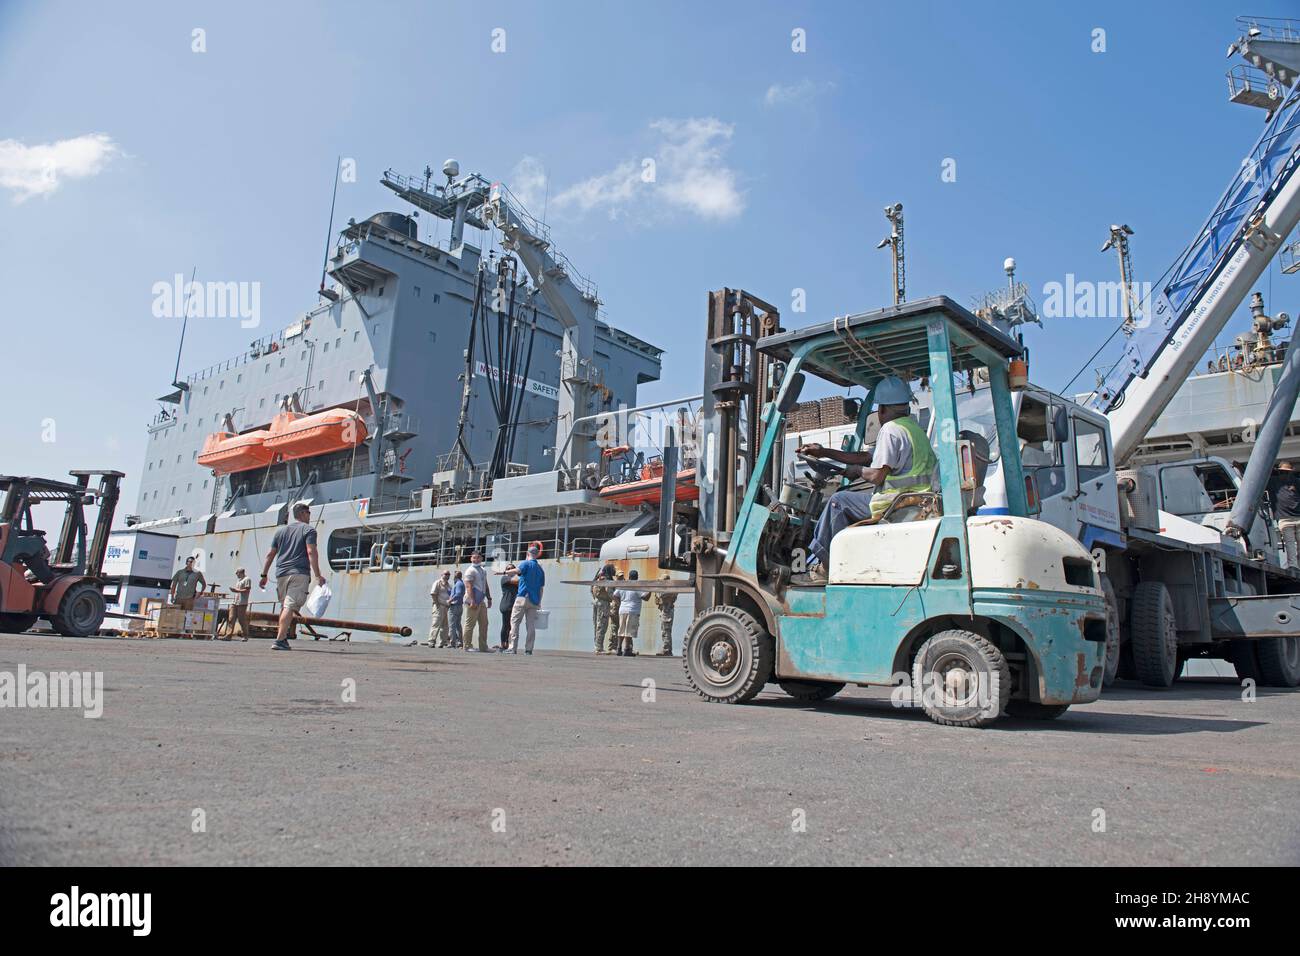 PORT OF DJIBOUTI, Djibouti (Nov. 29, 2021) – The Henry J. Kaiser-class fleet replenishment oiler USNS Kanawha (T-AO-196) sits pier side during a sustainment and logistics visit at the Port of Djibouti, Nov. 29, 2021. Kanawha is deployed to the U.S. 5th Fleet area of operations in support of naval operations to ensure maritime stability and security in the Central Region, connecting the Mediterranean and Pacific through the Western Indian Ocean and the strategic choke points. Camp Lemonnier, Djibouti serves as an expeditionary base for U.S. military forces providing support to ships, aircraft a Stock Photo